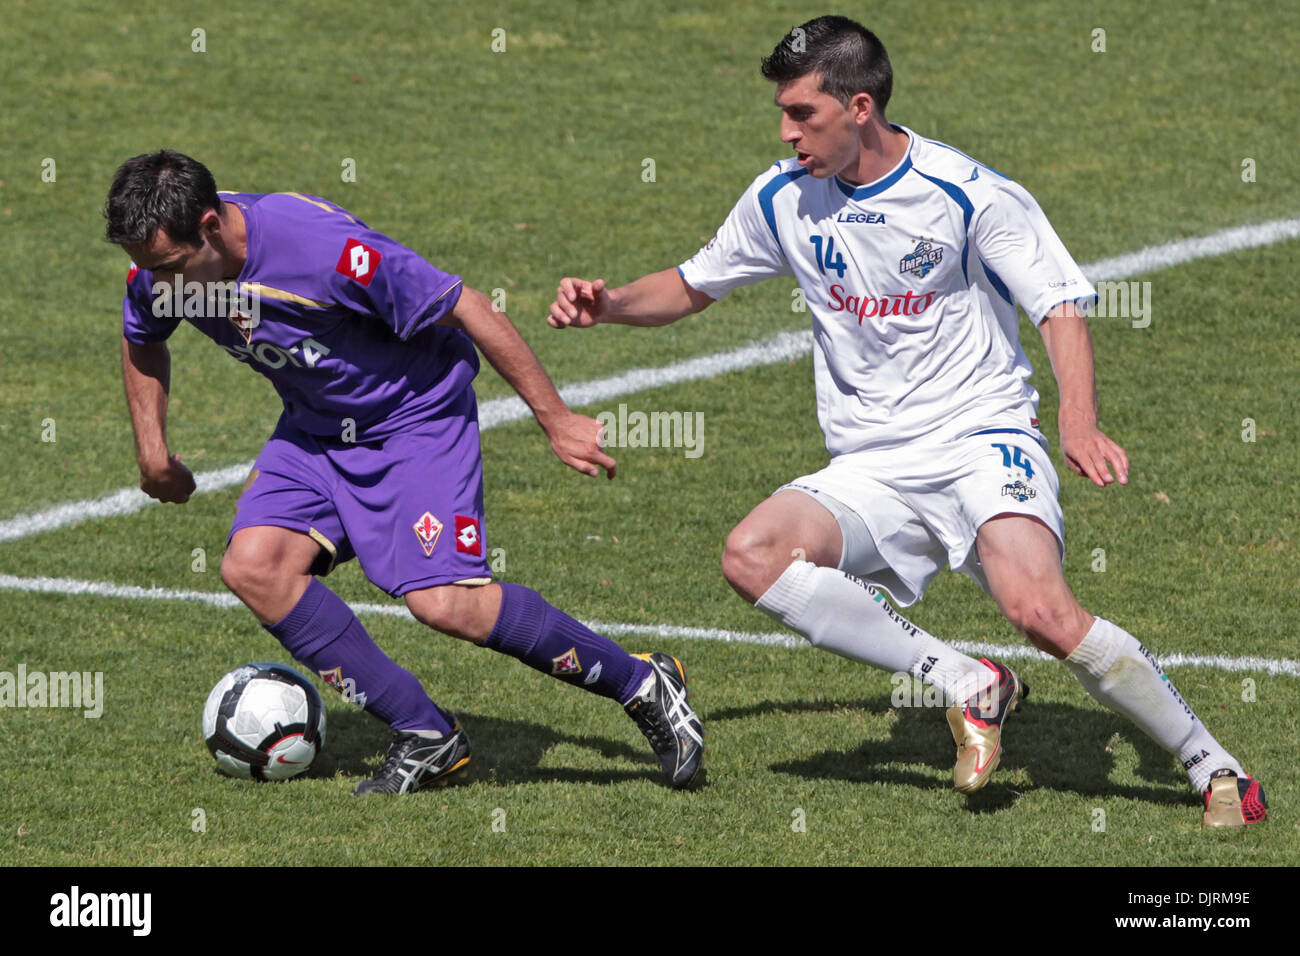 May 23, 2010 - Montreal, Quebec, Canada - 23 May 2010:  Fiorentina's midfielder Marco Marchionni (#32) and Montreal Impact's midfielder Tony Donatelli(#14) battle for the ball in game action during the second half of play of the FIFA game between AFC Fiorentina and the Montreal Imapct played at Saputo Stadium in Montreal, Canada. The game ended in a 1-1 tie..Mandatory Credit: Phili Stock Photo